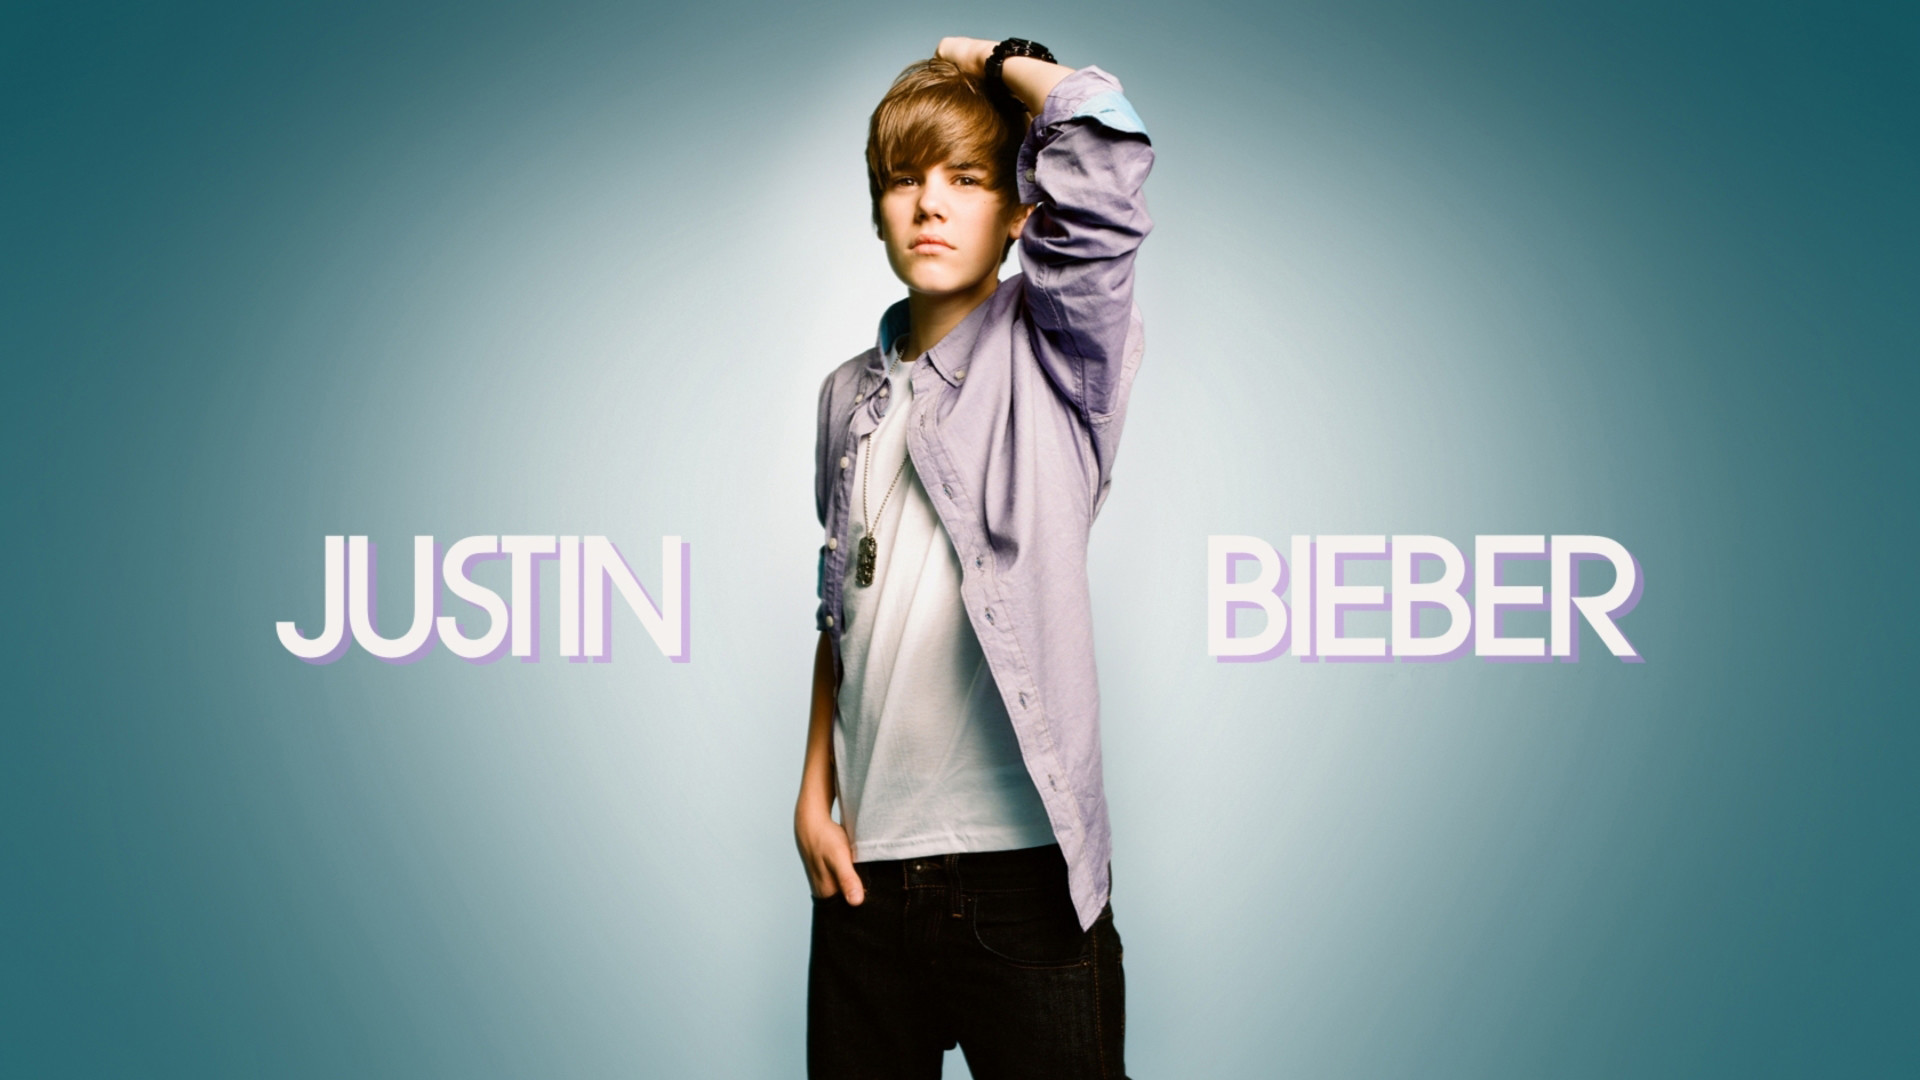 1920x1080 justin bieber full hd new good look hd wallpaper images download hd  download free amazing background